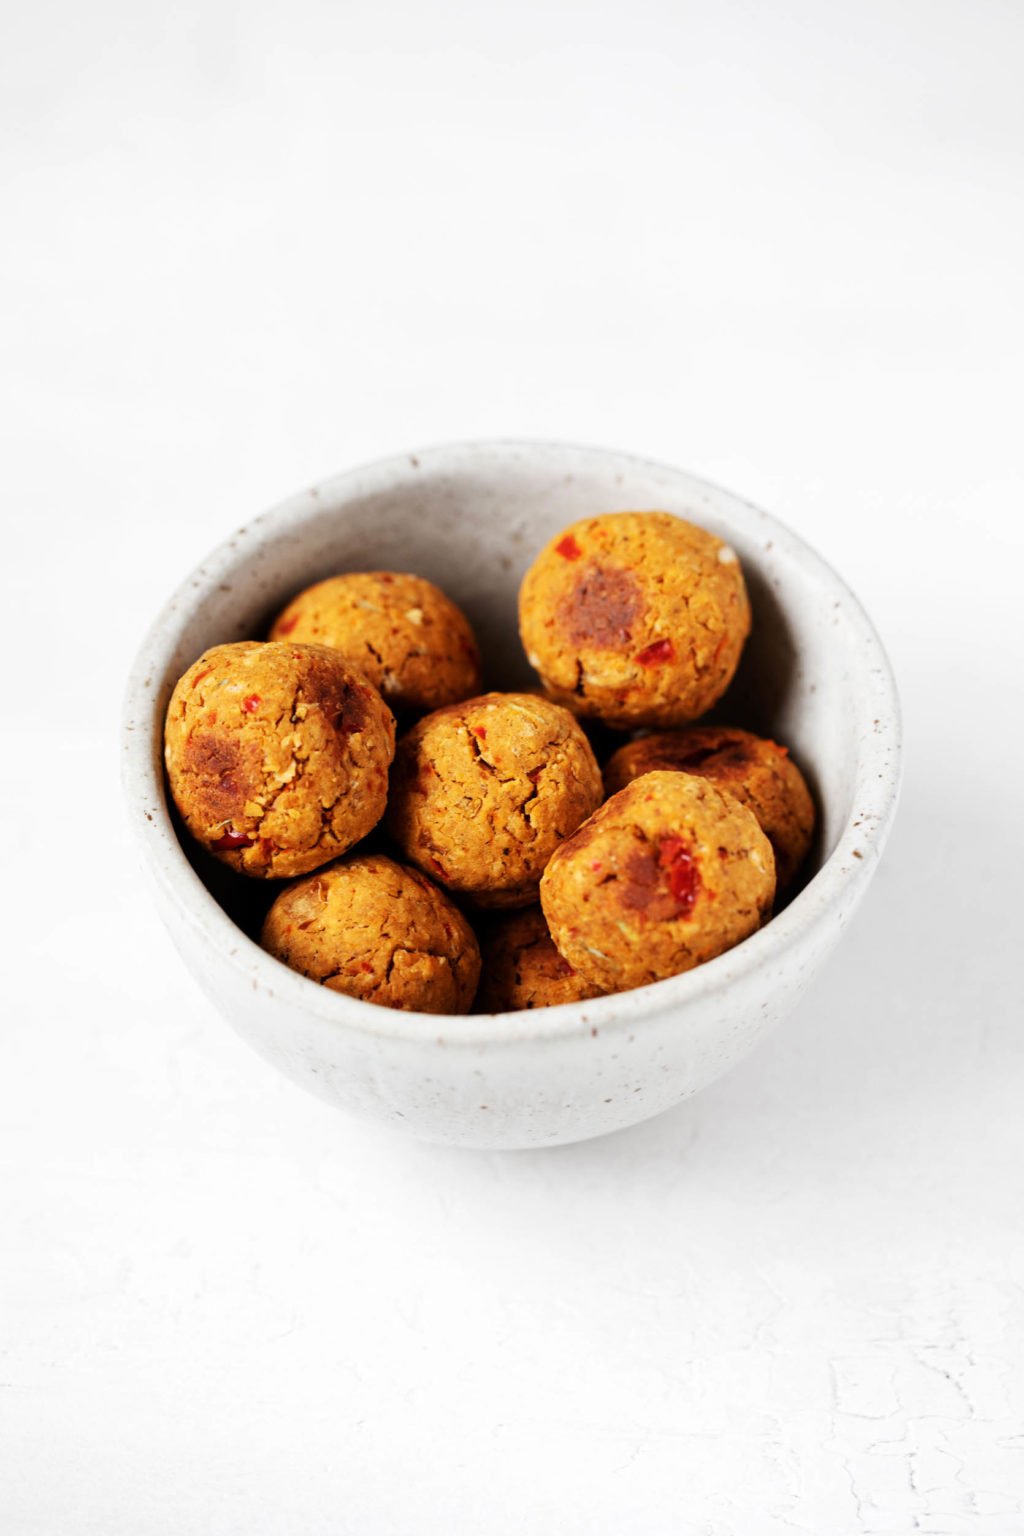 A small, ceramic bowl holds plant-based "meatballs" that have been prepared with chickpeas and oats.